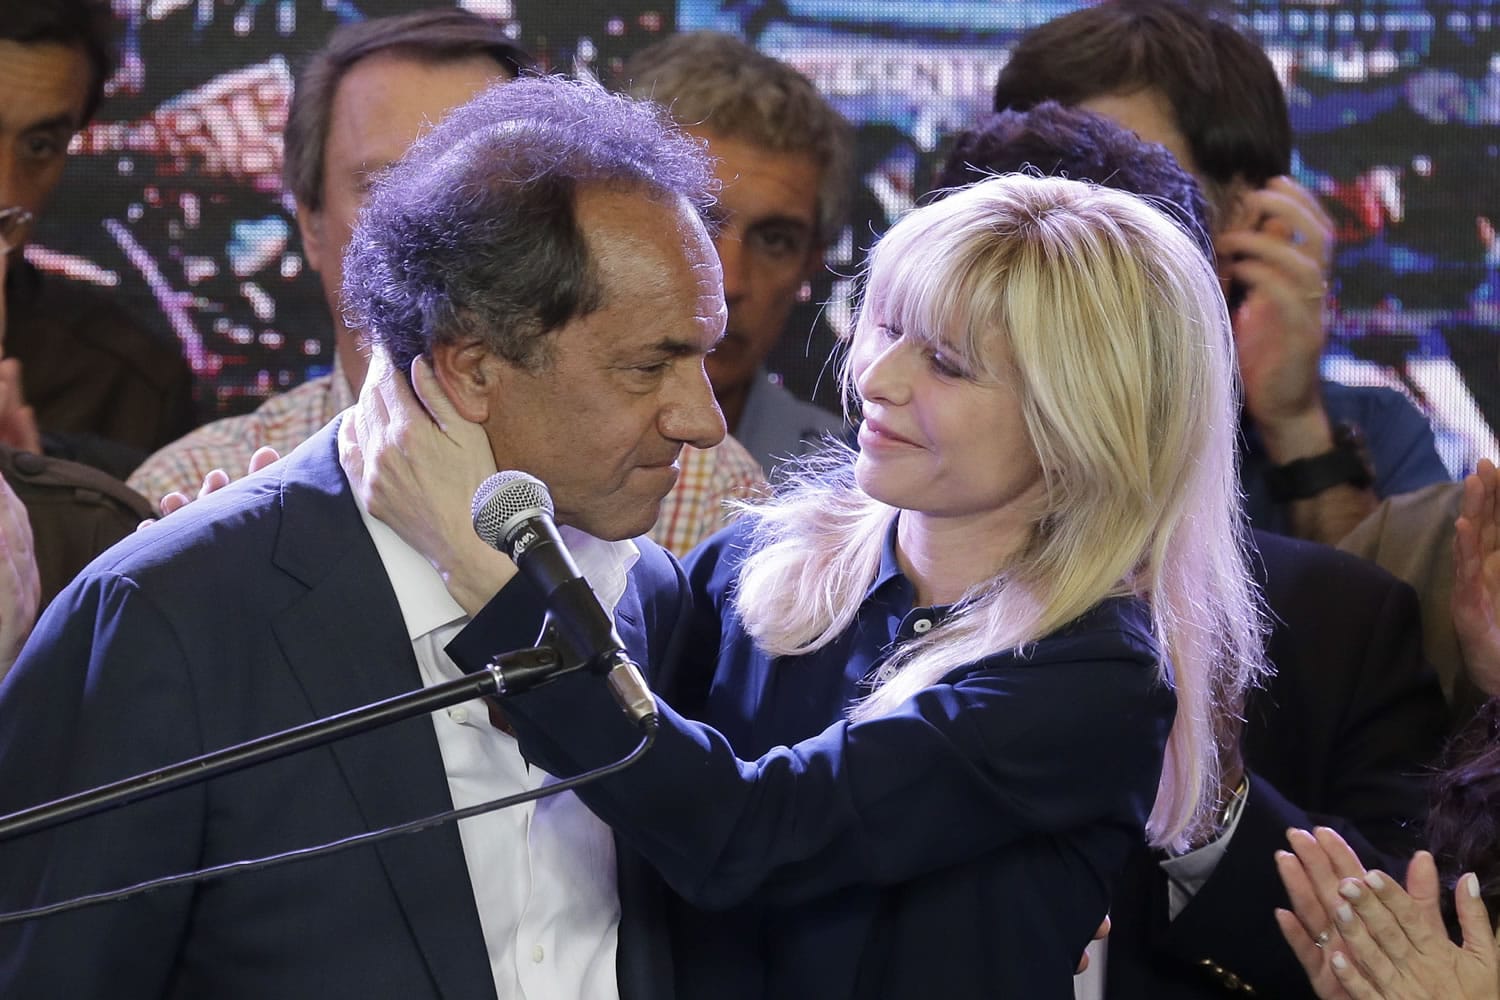 Daniel Scioli, the ruling party presidential candidate, is hugged by his wife Karina Rabolini after he delivered his concession speach to opposition candidate Mauricio Macri during Argentina&#039;s presidential election in Buenos Aires,  Sunday, Nov. 22, 2015. Macri has won Argentina&#039;s historic runoff election, putting an end to the era of President Cristina Fernandez, who along with her late husband dominated the political scene and rewrote the country&#039;s social contract. (AP Photo/Victor R.